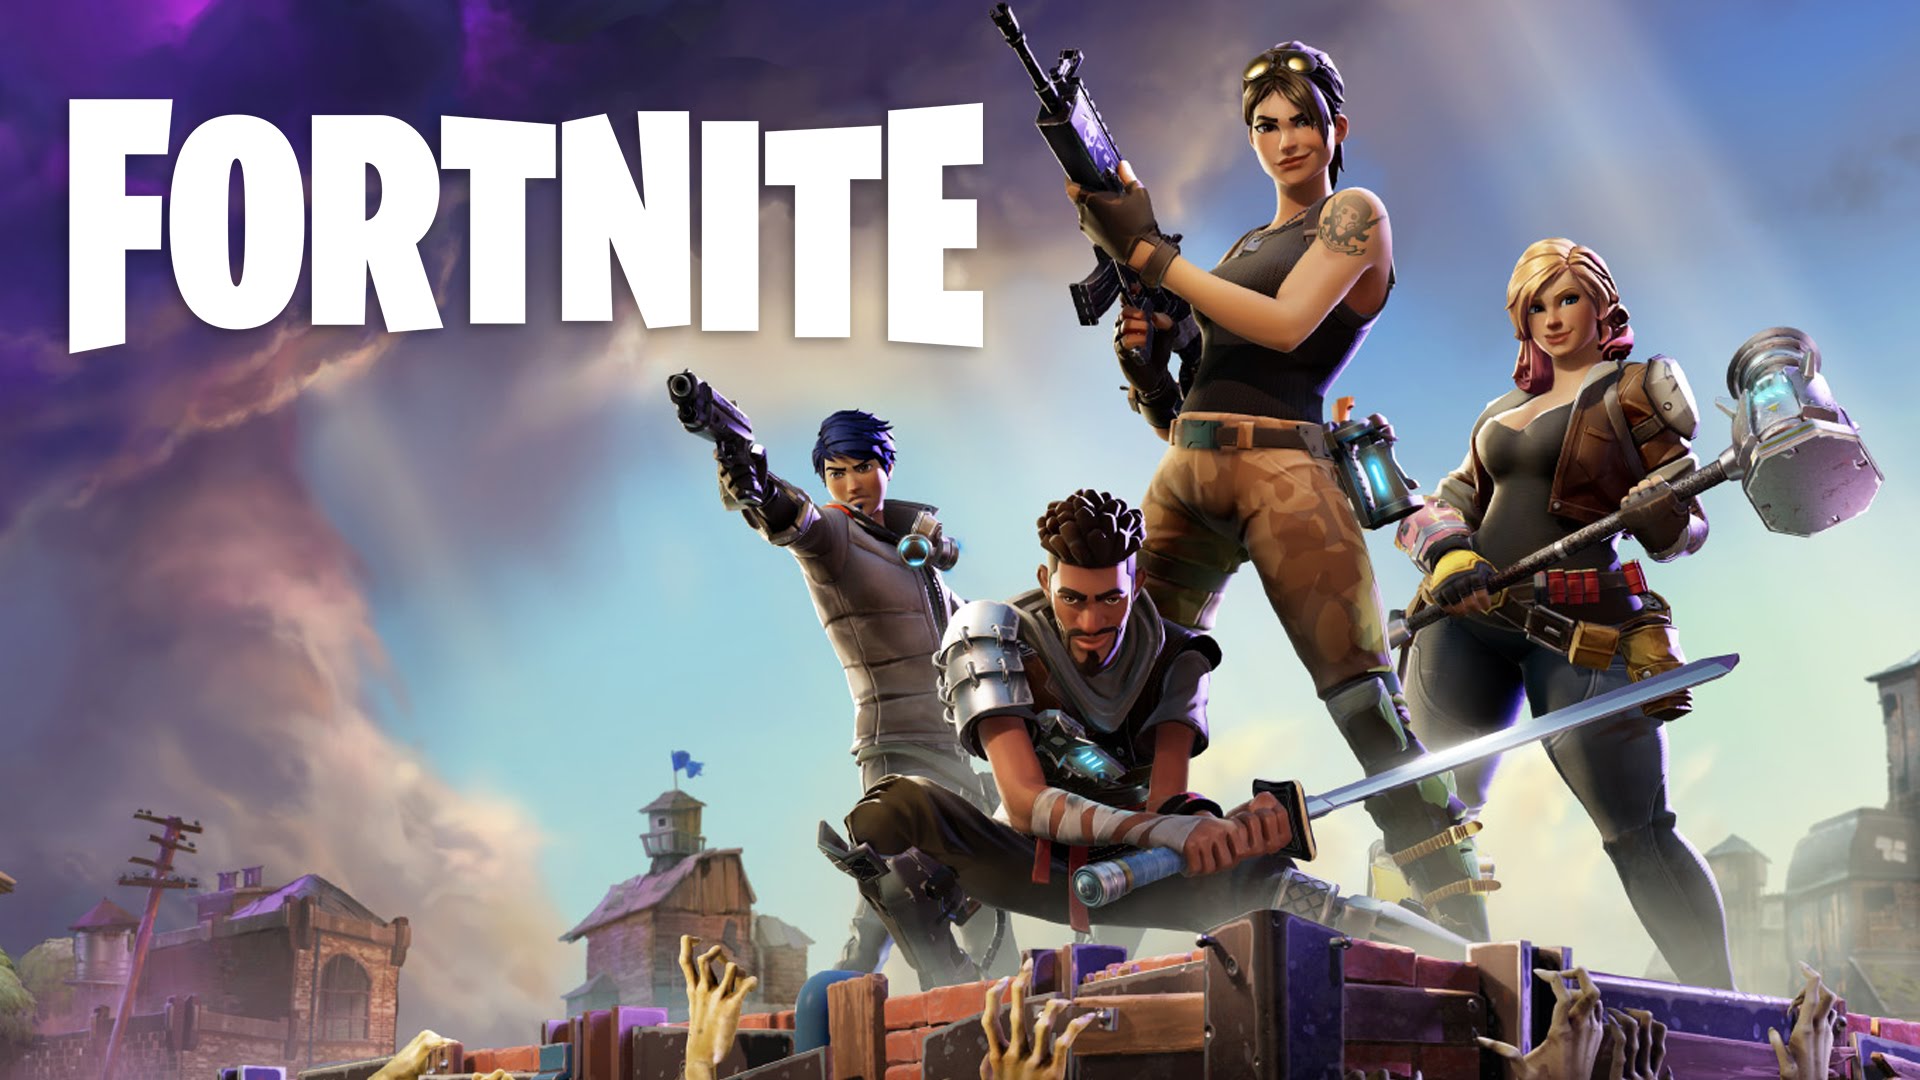 Fortnite Review – Problems in Infrastructure